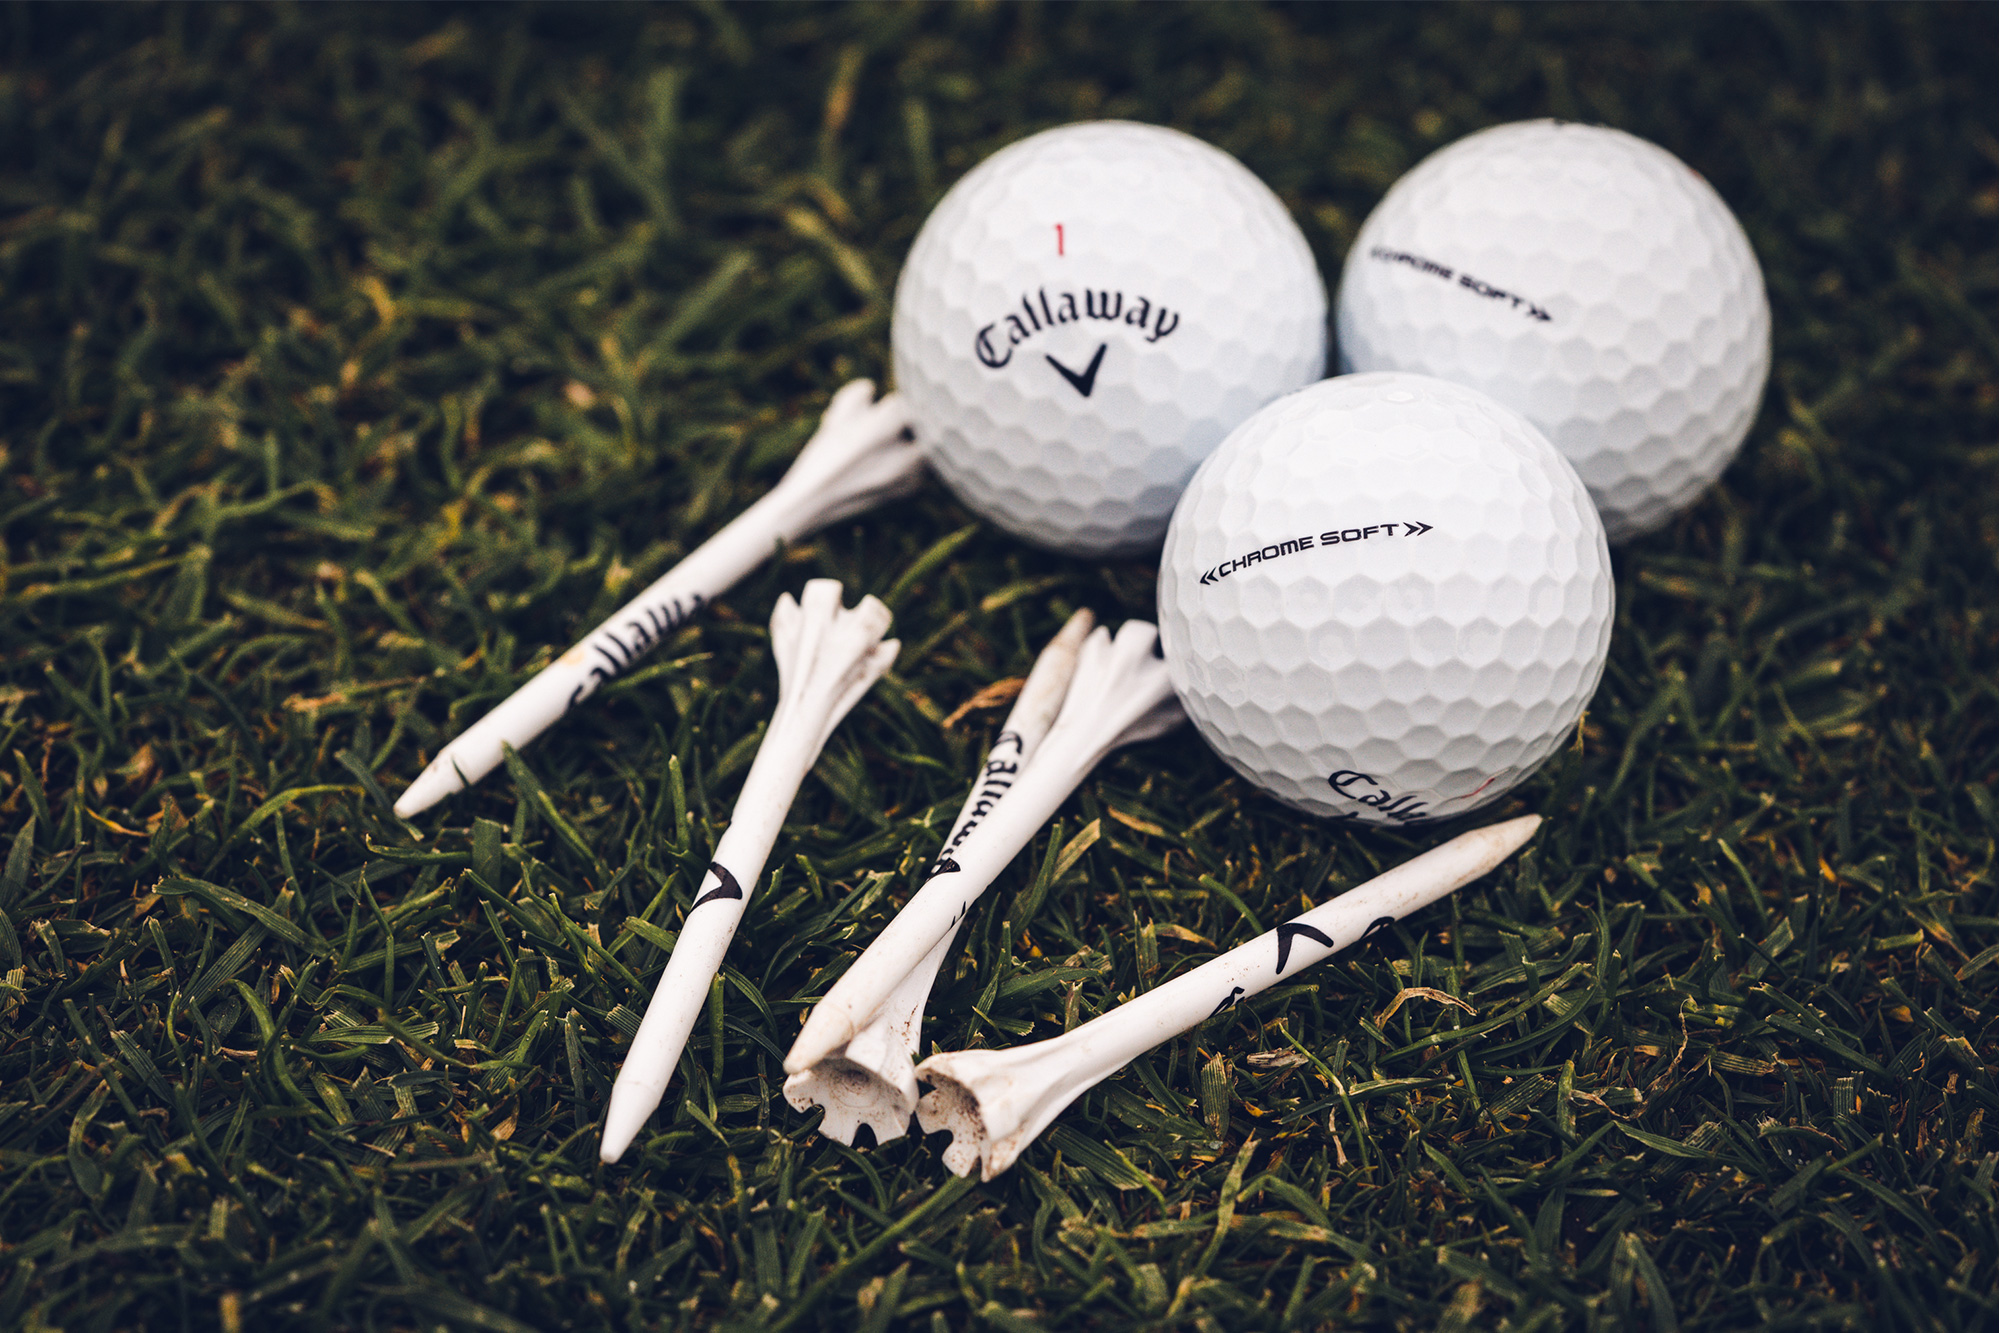 Which Callaway Chrome Soft should you use? - National Club Golfer